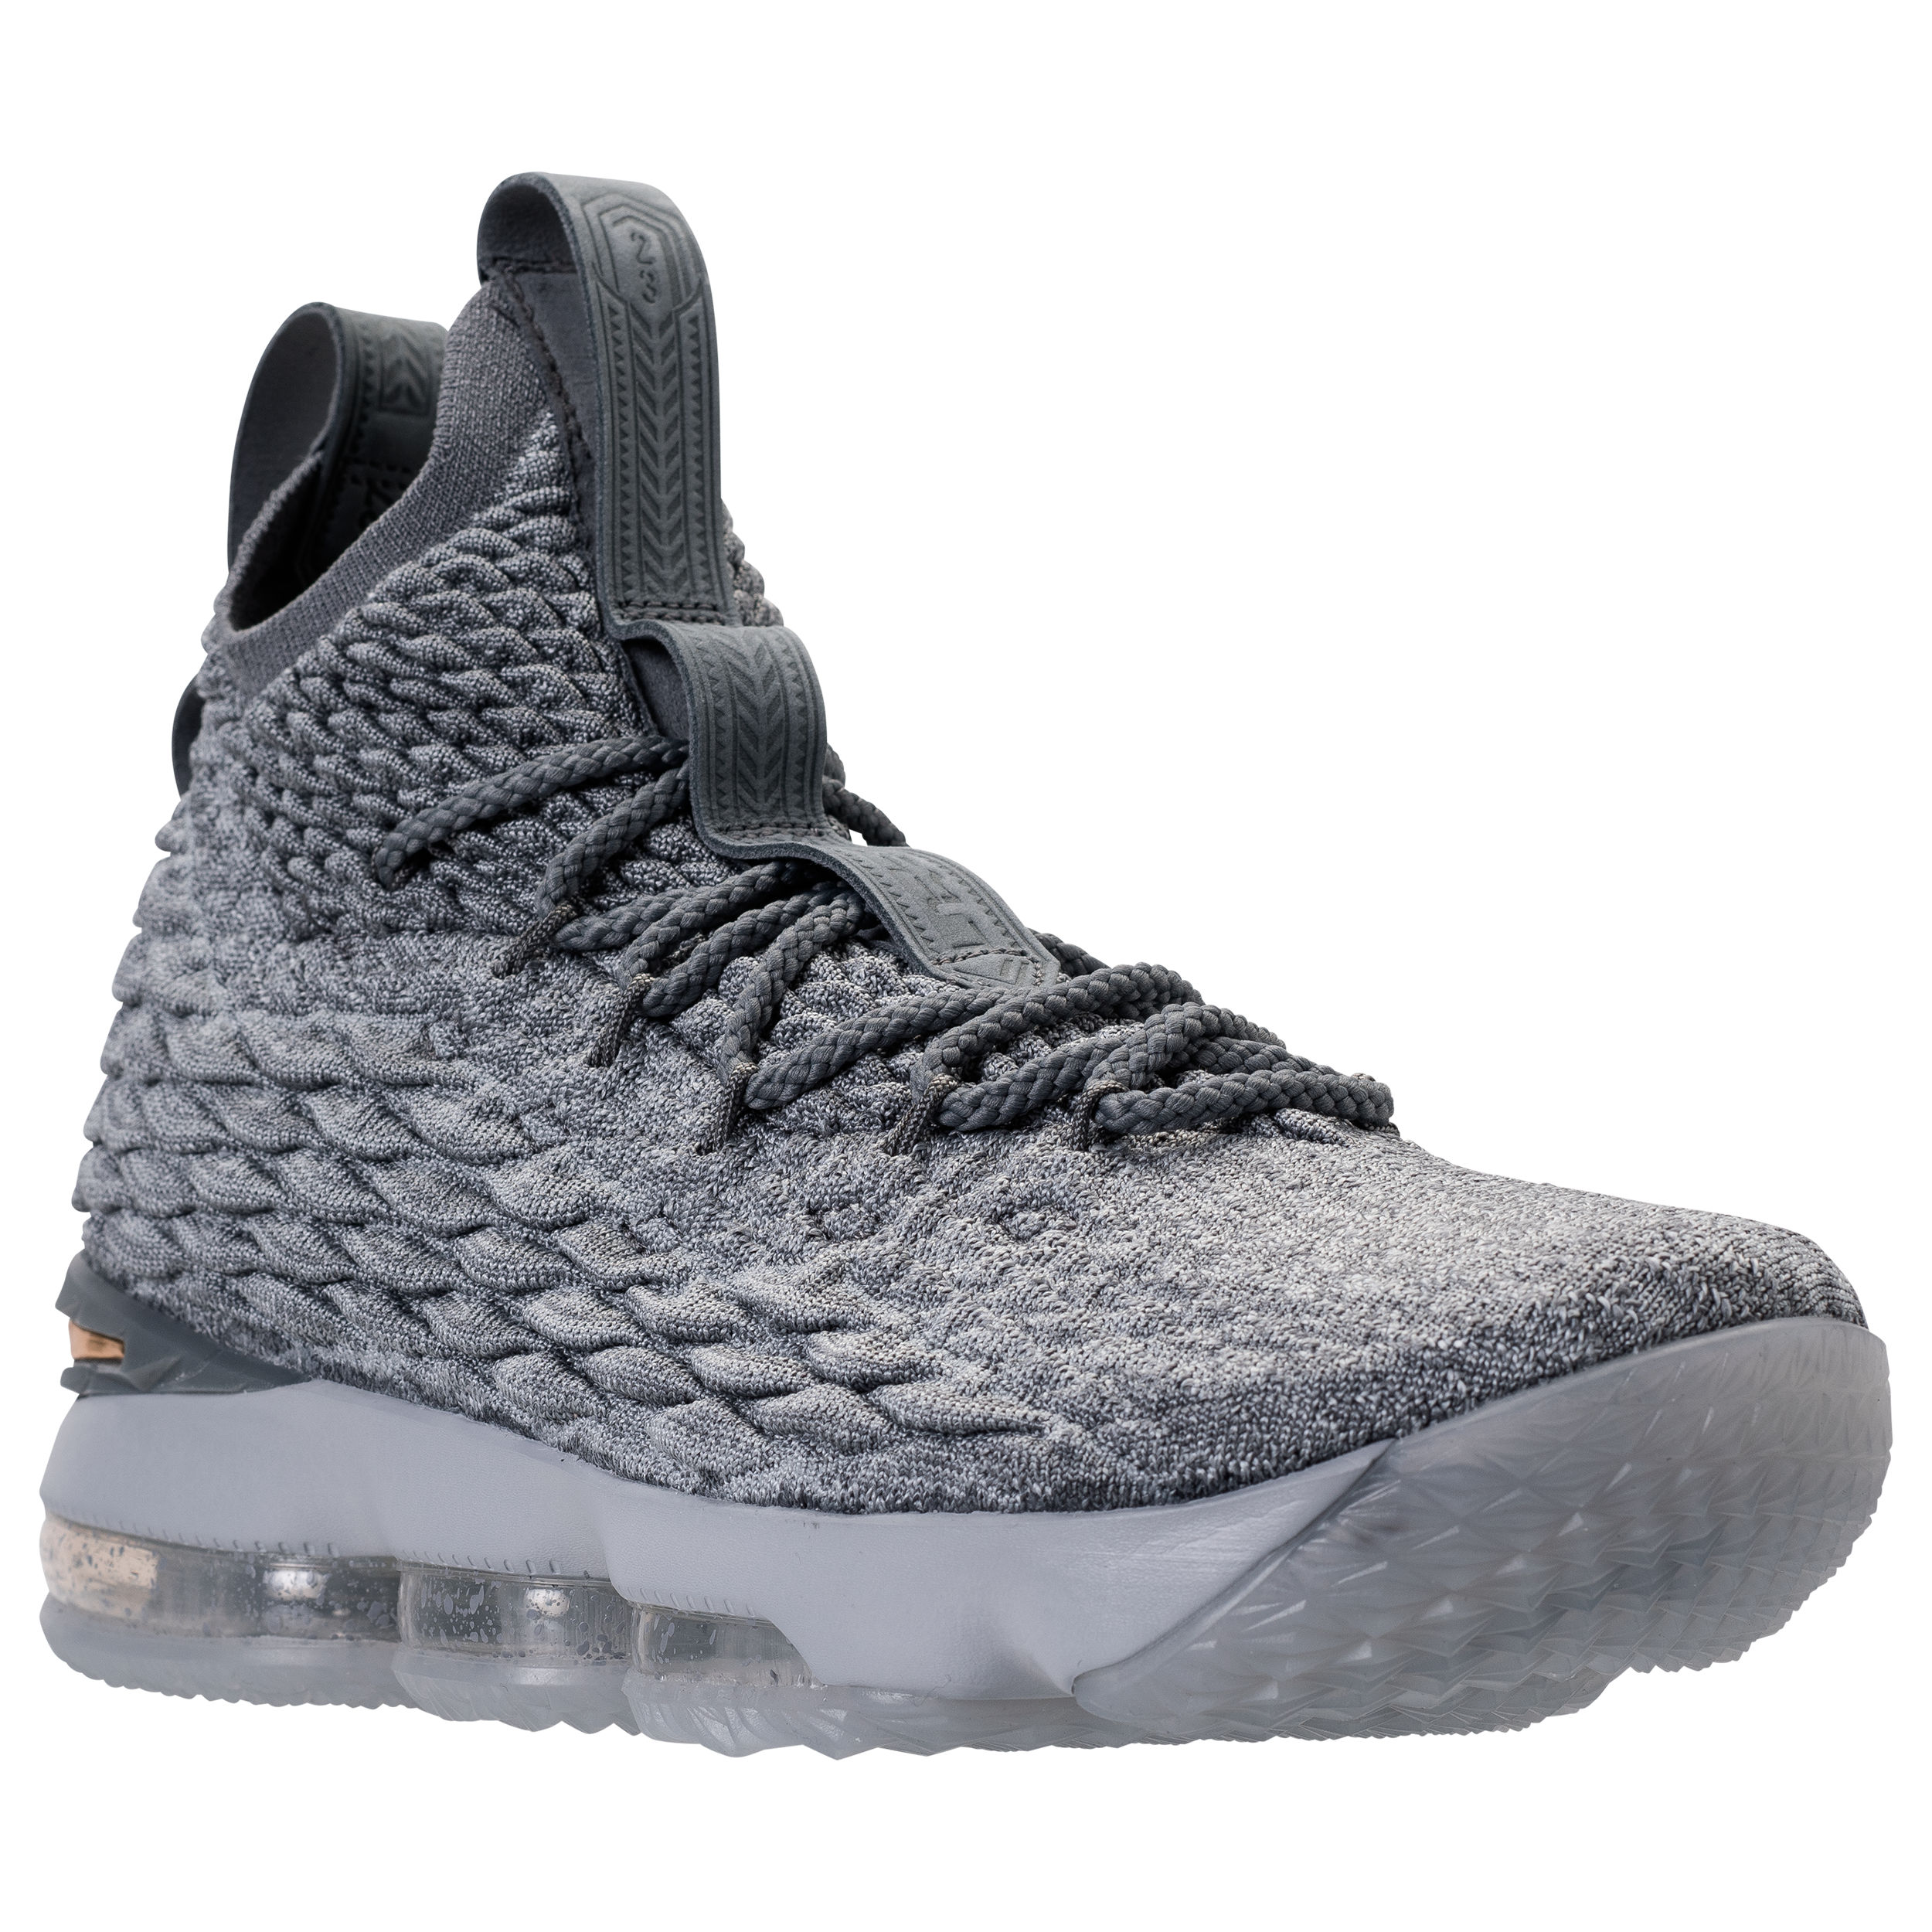 The Nike LeBron 15 'City Edition' is 